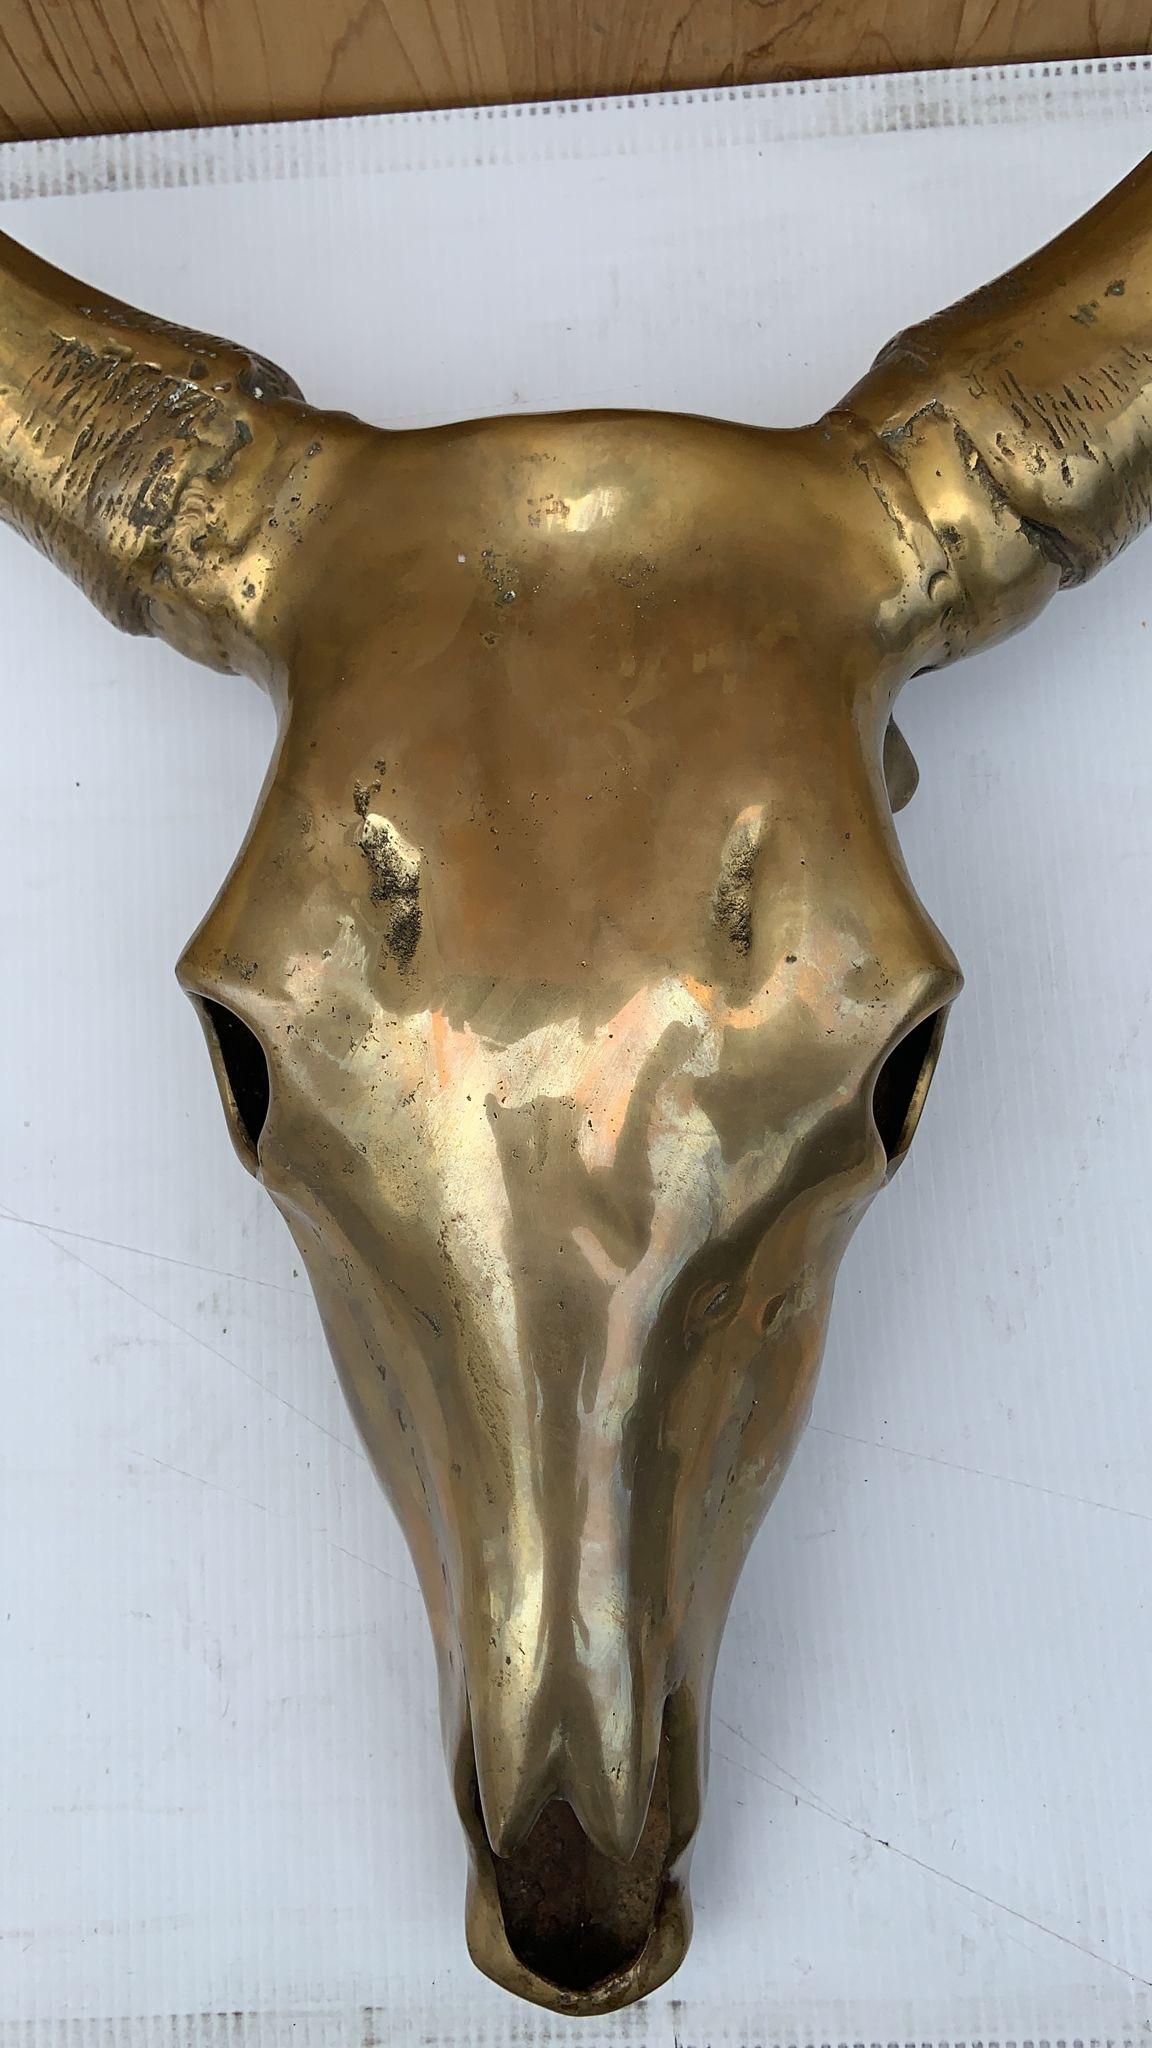 Vintage Modern Brass Cow Skull Wall Mounted Sculpture
Beautiful Brass Cow Head Skull Wall Mounted Sculpture,
circa 1960
Dimensions:
D 6.5”
W 22” (widest Horn part)
W 9” (by the eyes)
H 29”.